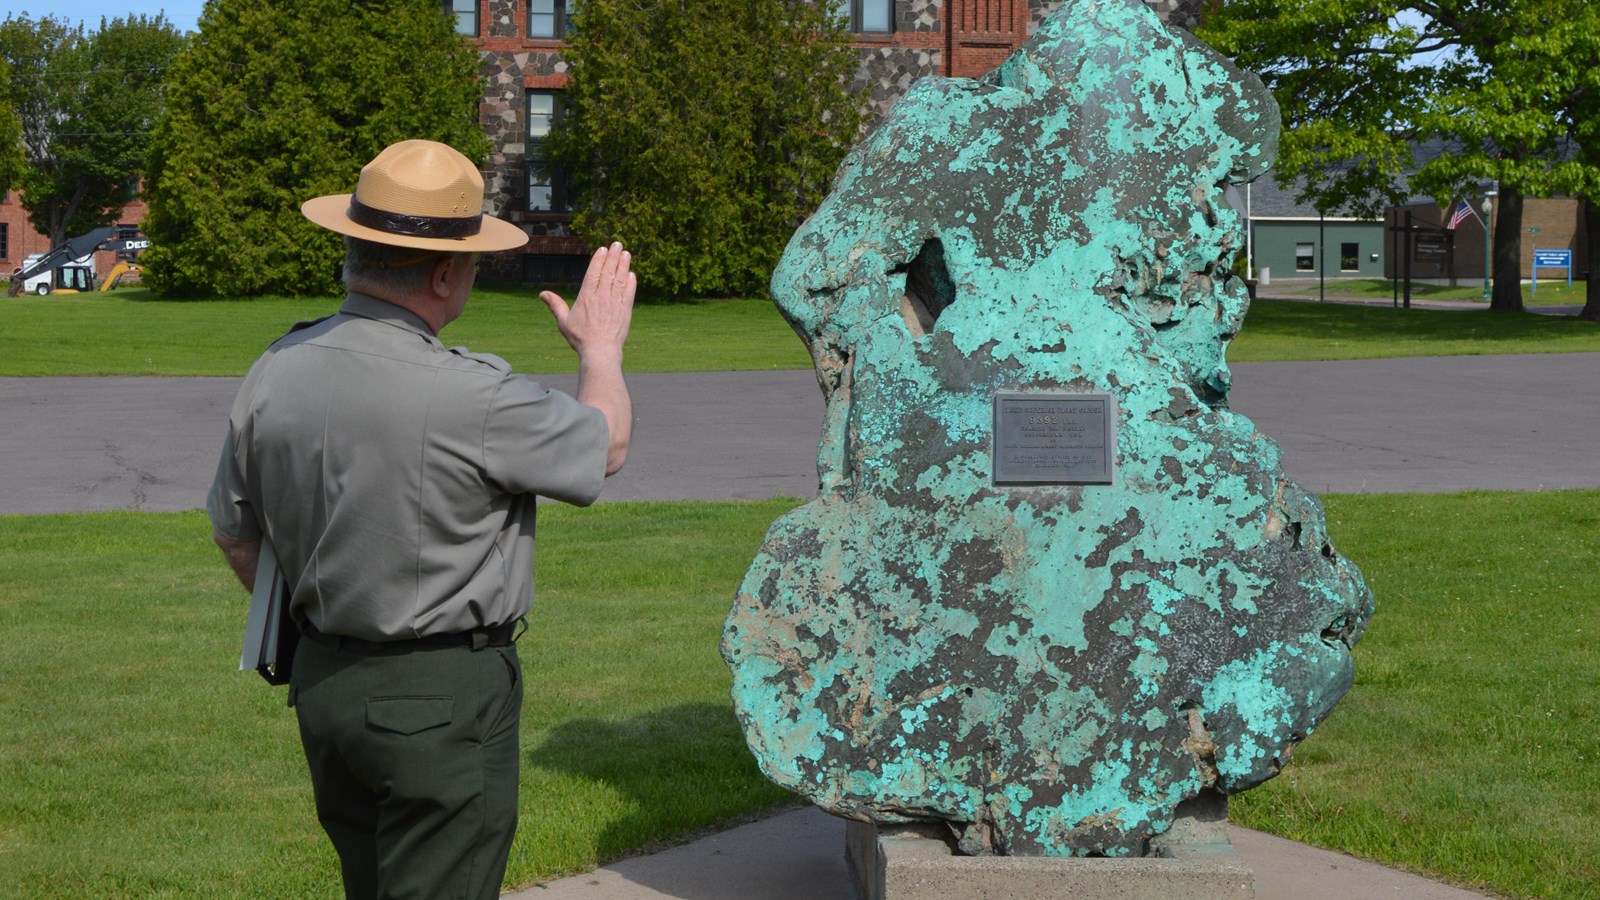 A ranger faces a specimen of float copper with a teal patina displayed on a concrete platform.